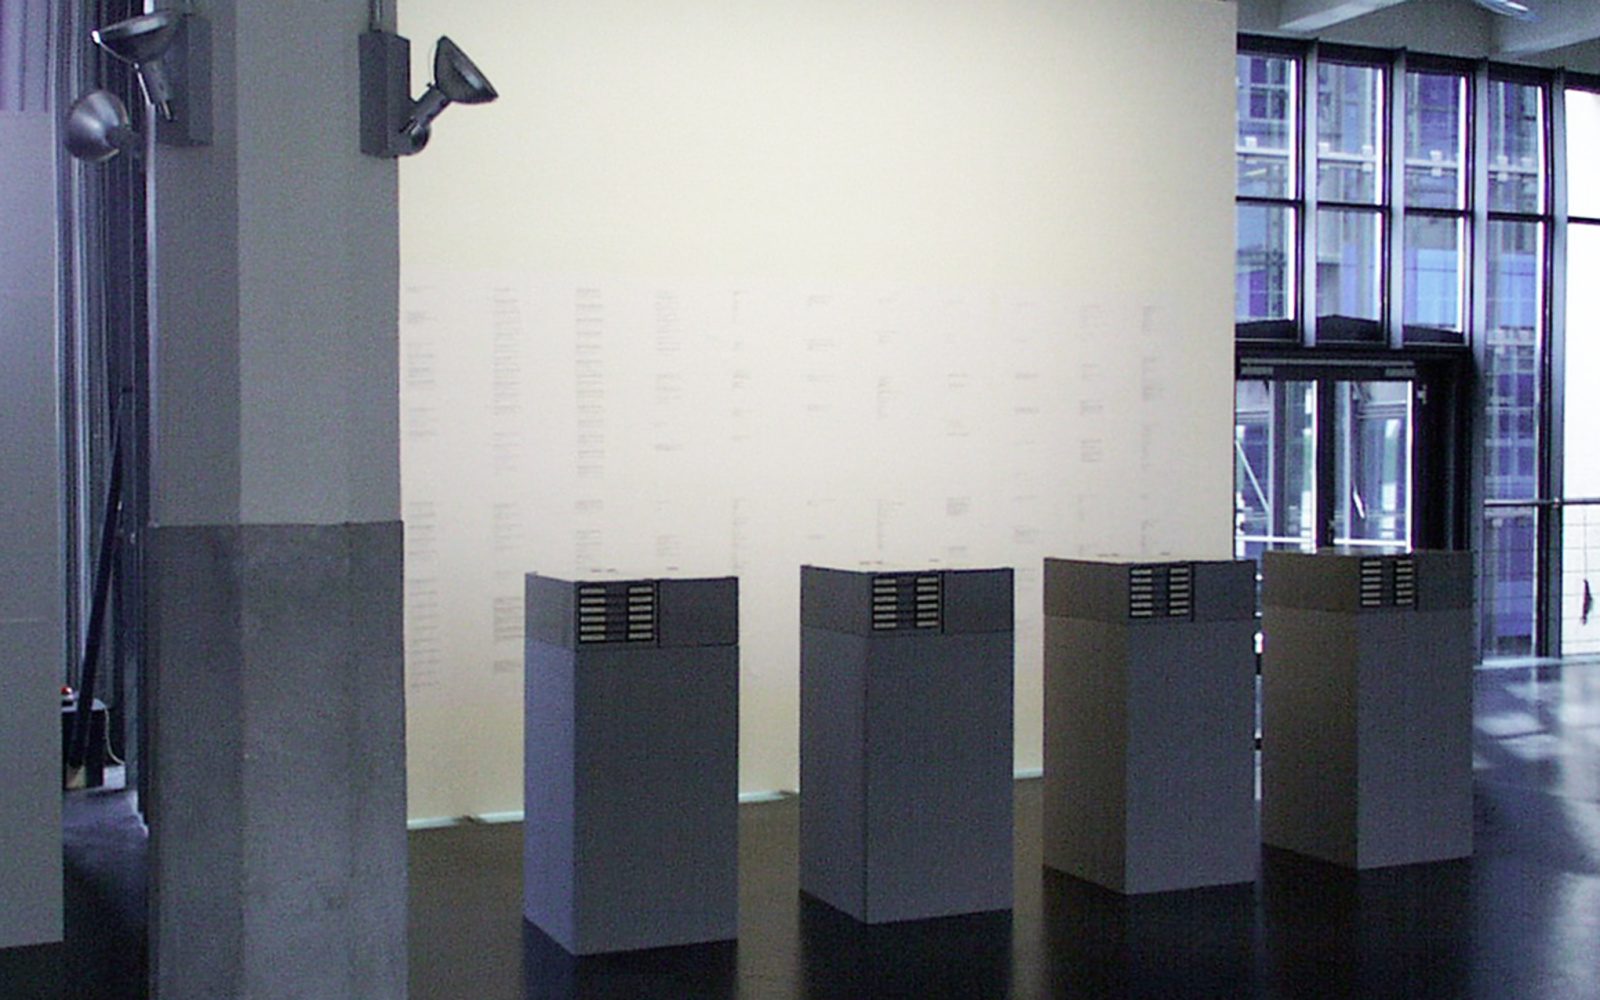 Four gray filing cabinets in front of a brightly lit wall.